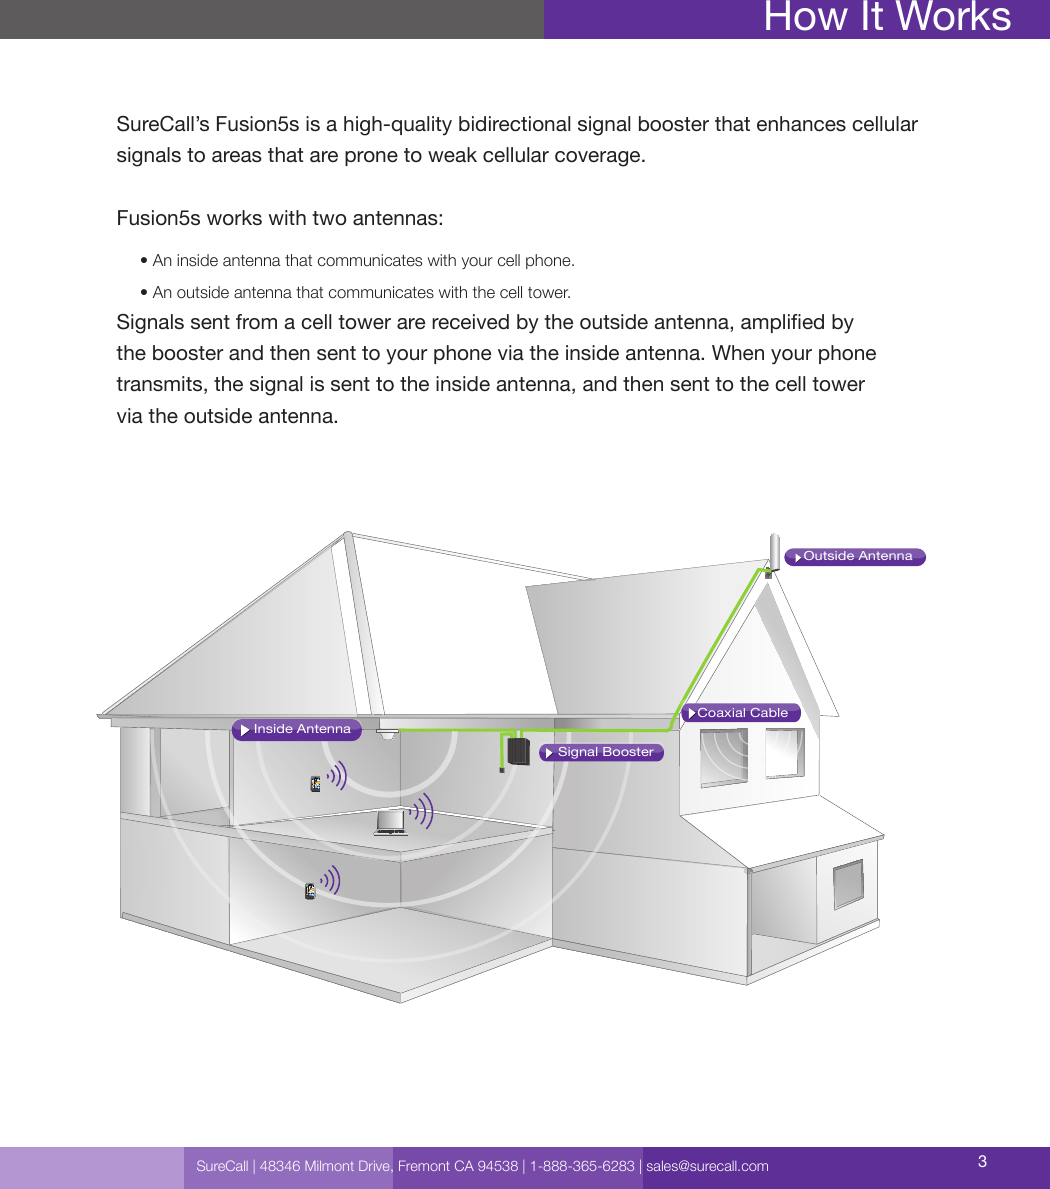 Coaxial CableSignal BoosterInside AntennaOutside AntennaSureCall | 48346 Milmont Drive, Fremont CA 94538 | 1-888-365-6283 | sales@surecall.com 3How It WorksSureCall’s Fusion5s is a high-quality bidirectional signal booster that enhances cellular signals to areas that are prone to weak cellular coverage.Fusion5s works with two antennas:     • An inside antenna that communicates with your cell phone.     • An outside antenna that communicates with the cell tower.Signals sent from a cell tower are received by the outside antenna, amplied by  the booster and then sent to your phone via the inside antenna. When your phone  transmits, the signal is sent to the inside antenna, and then sent to the cell tower  via the outside antenna.